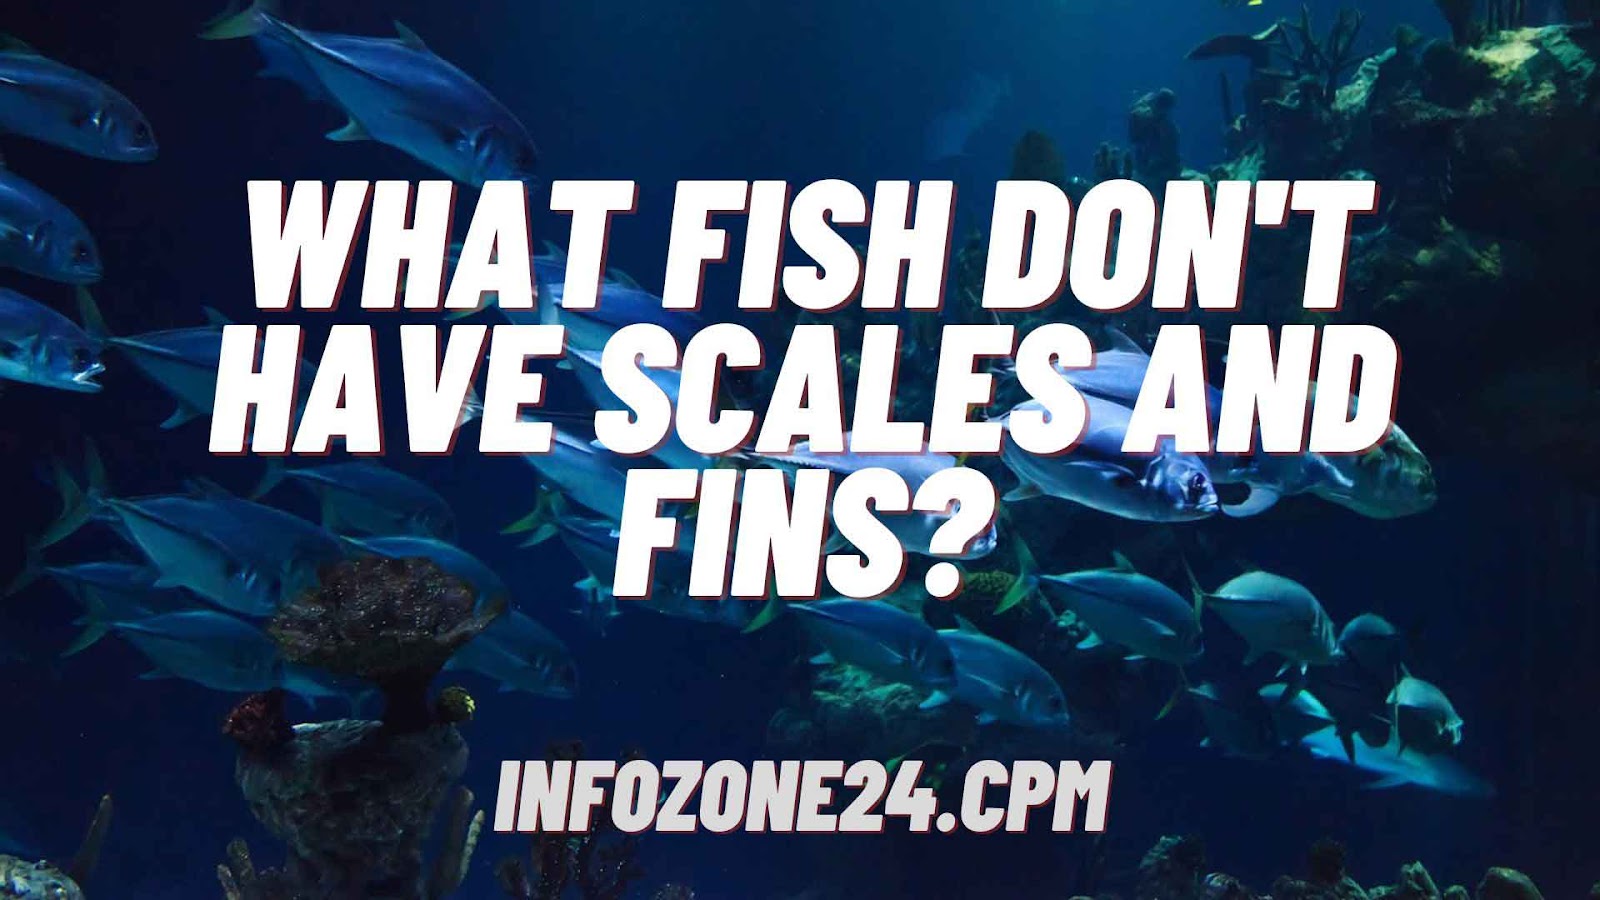 What Fish Don’t Have Scales and Fins?